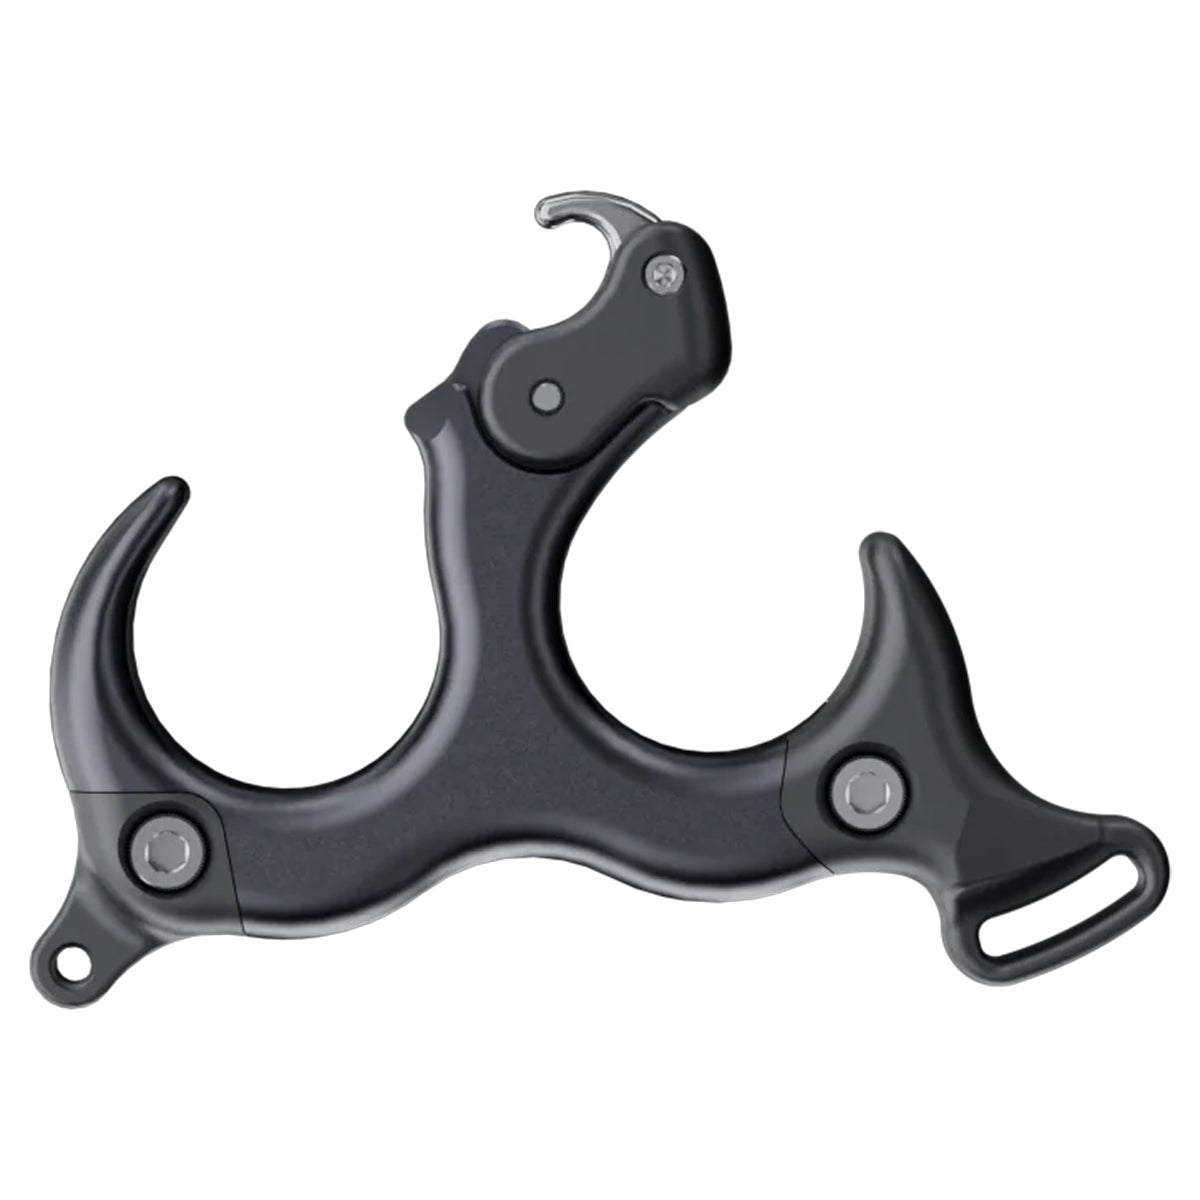 Ultraview Archery The Hinge 2 Finger Attachments in  by GOHUNT | Ultraview - GOHUNT Shop